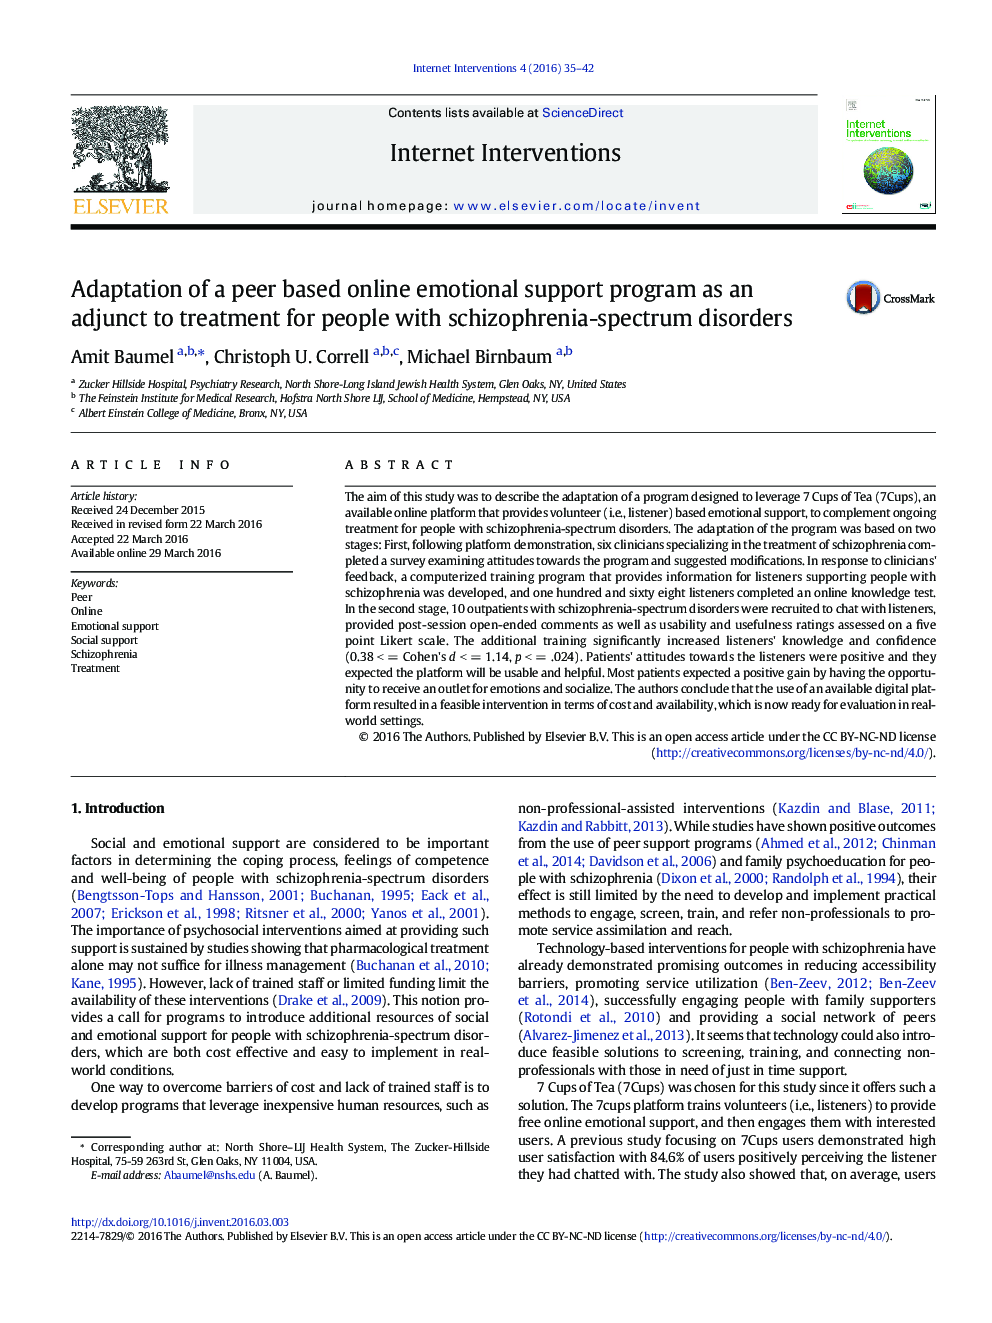 Adaptation of a peer based online emotional support program as an adjunct to treatment for people with schizophrenia-spectrum disorders